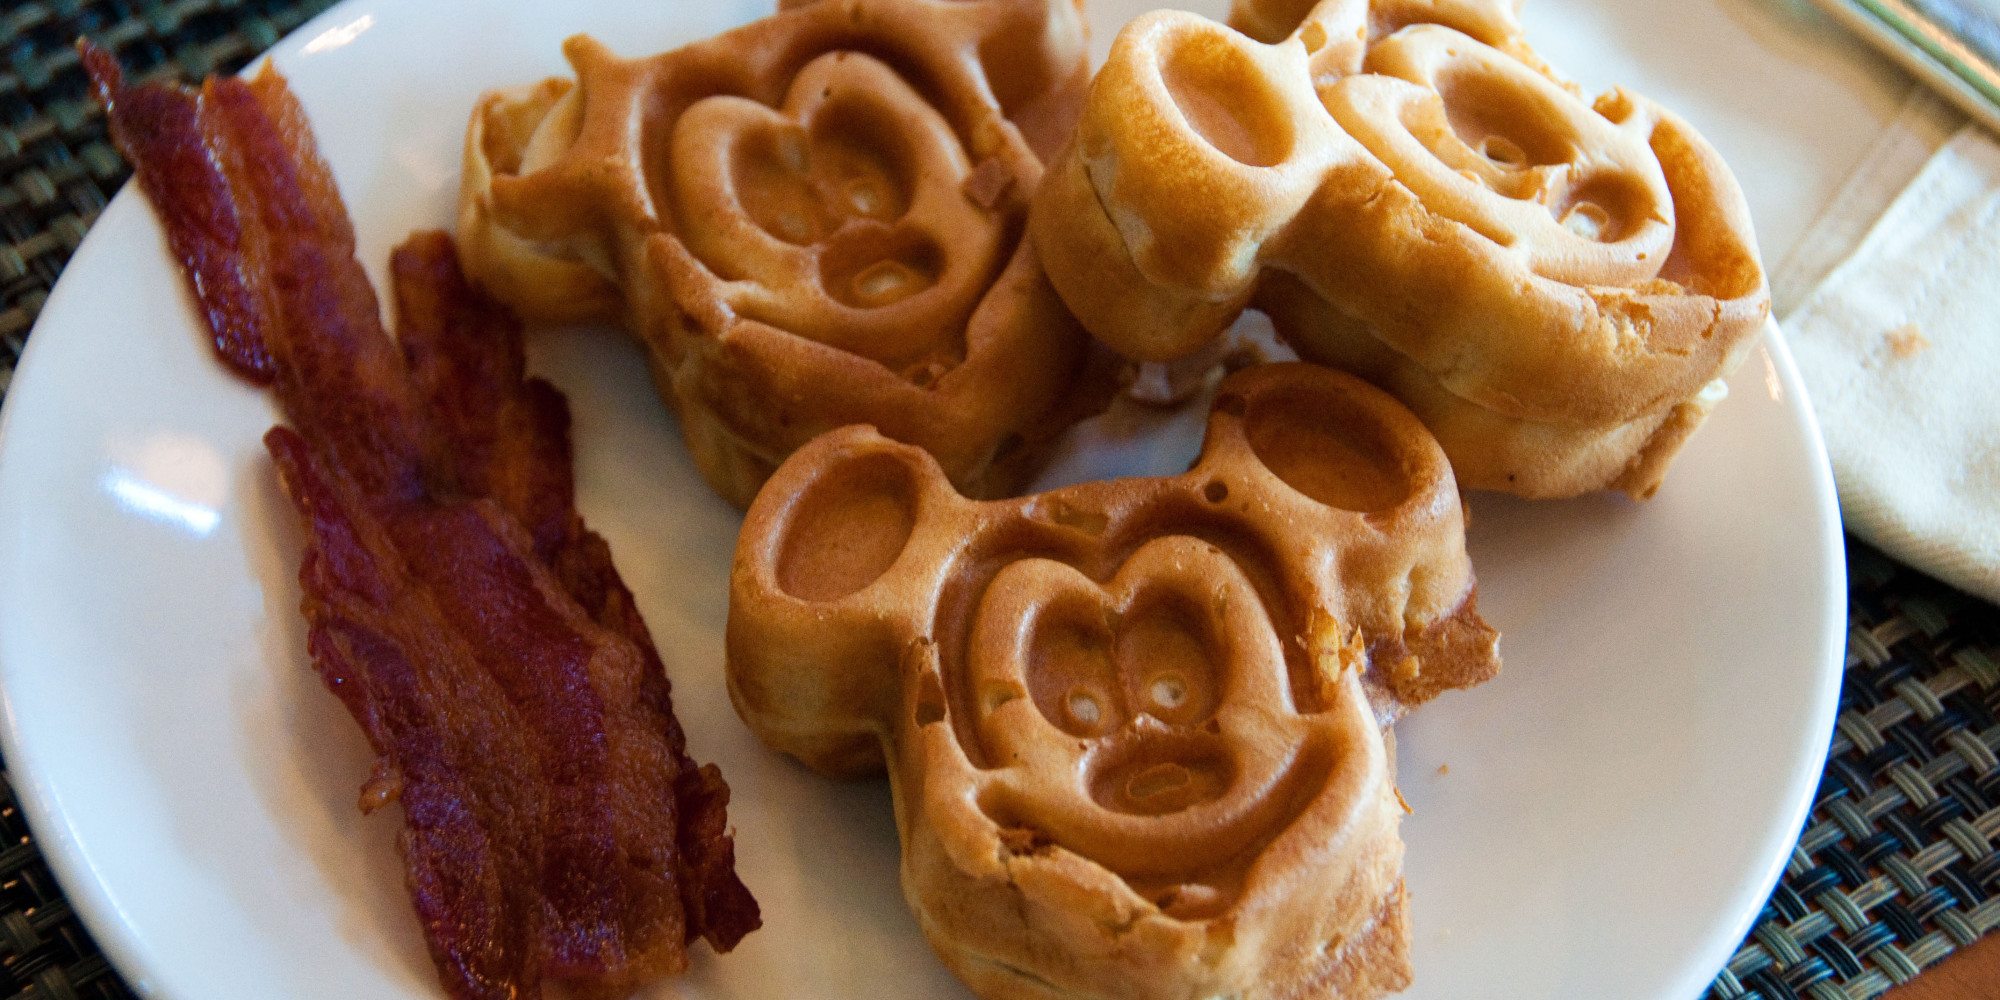 11-disney-treats-that-are-totally-worth-a-trip-to-the-park-huffpost